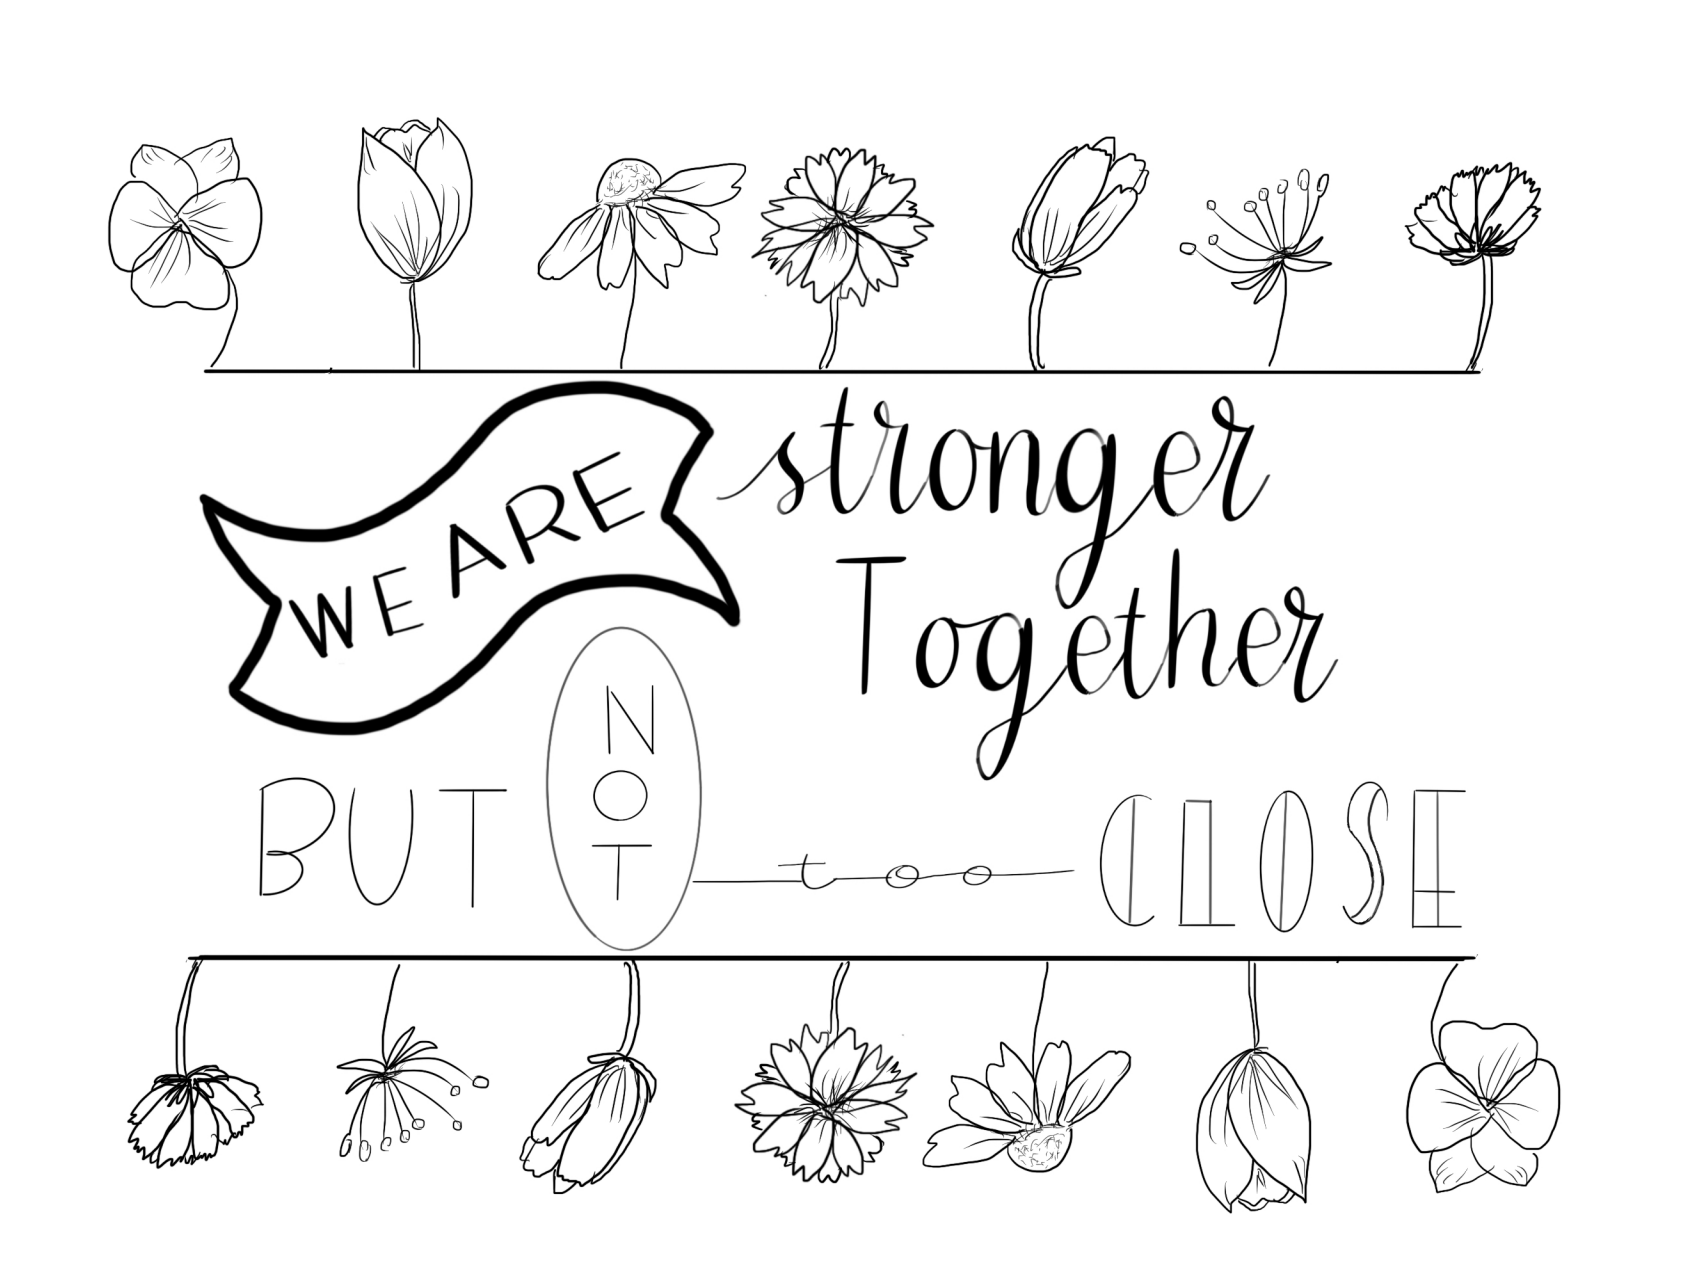 Stronger Together - Free Coloring Page